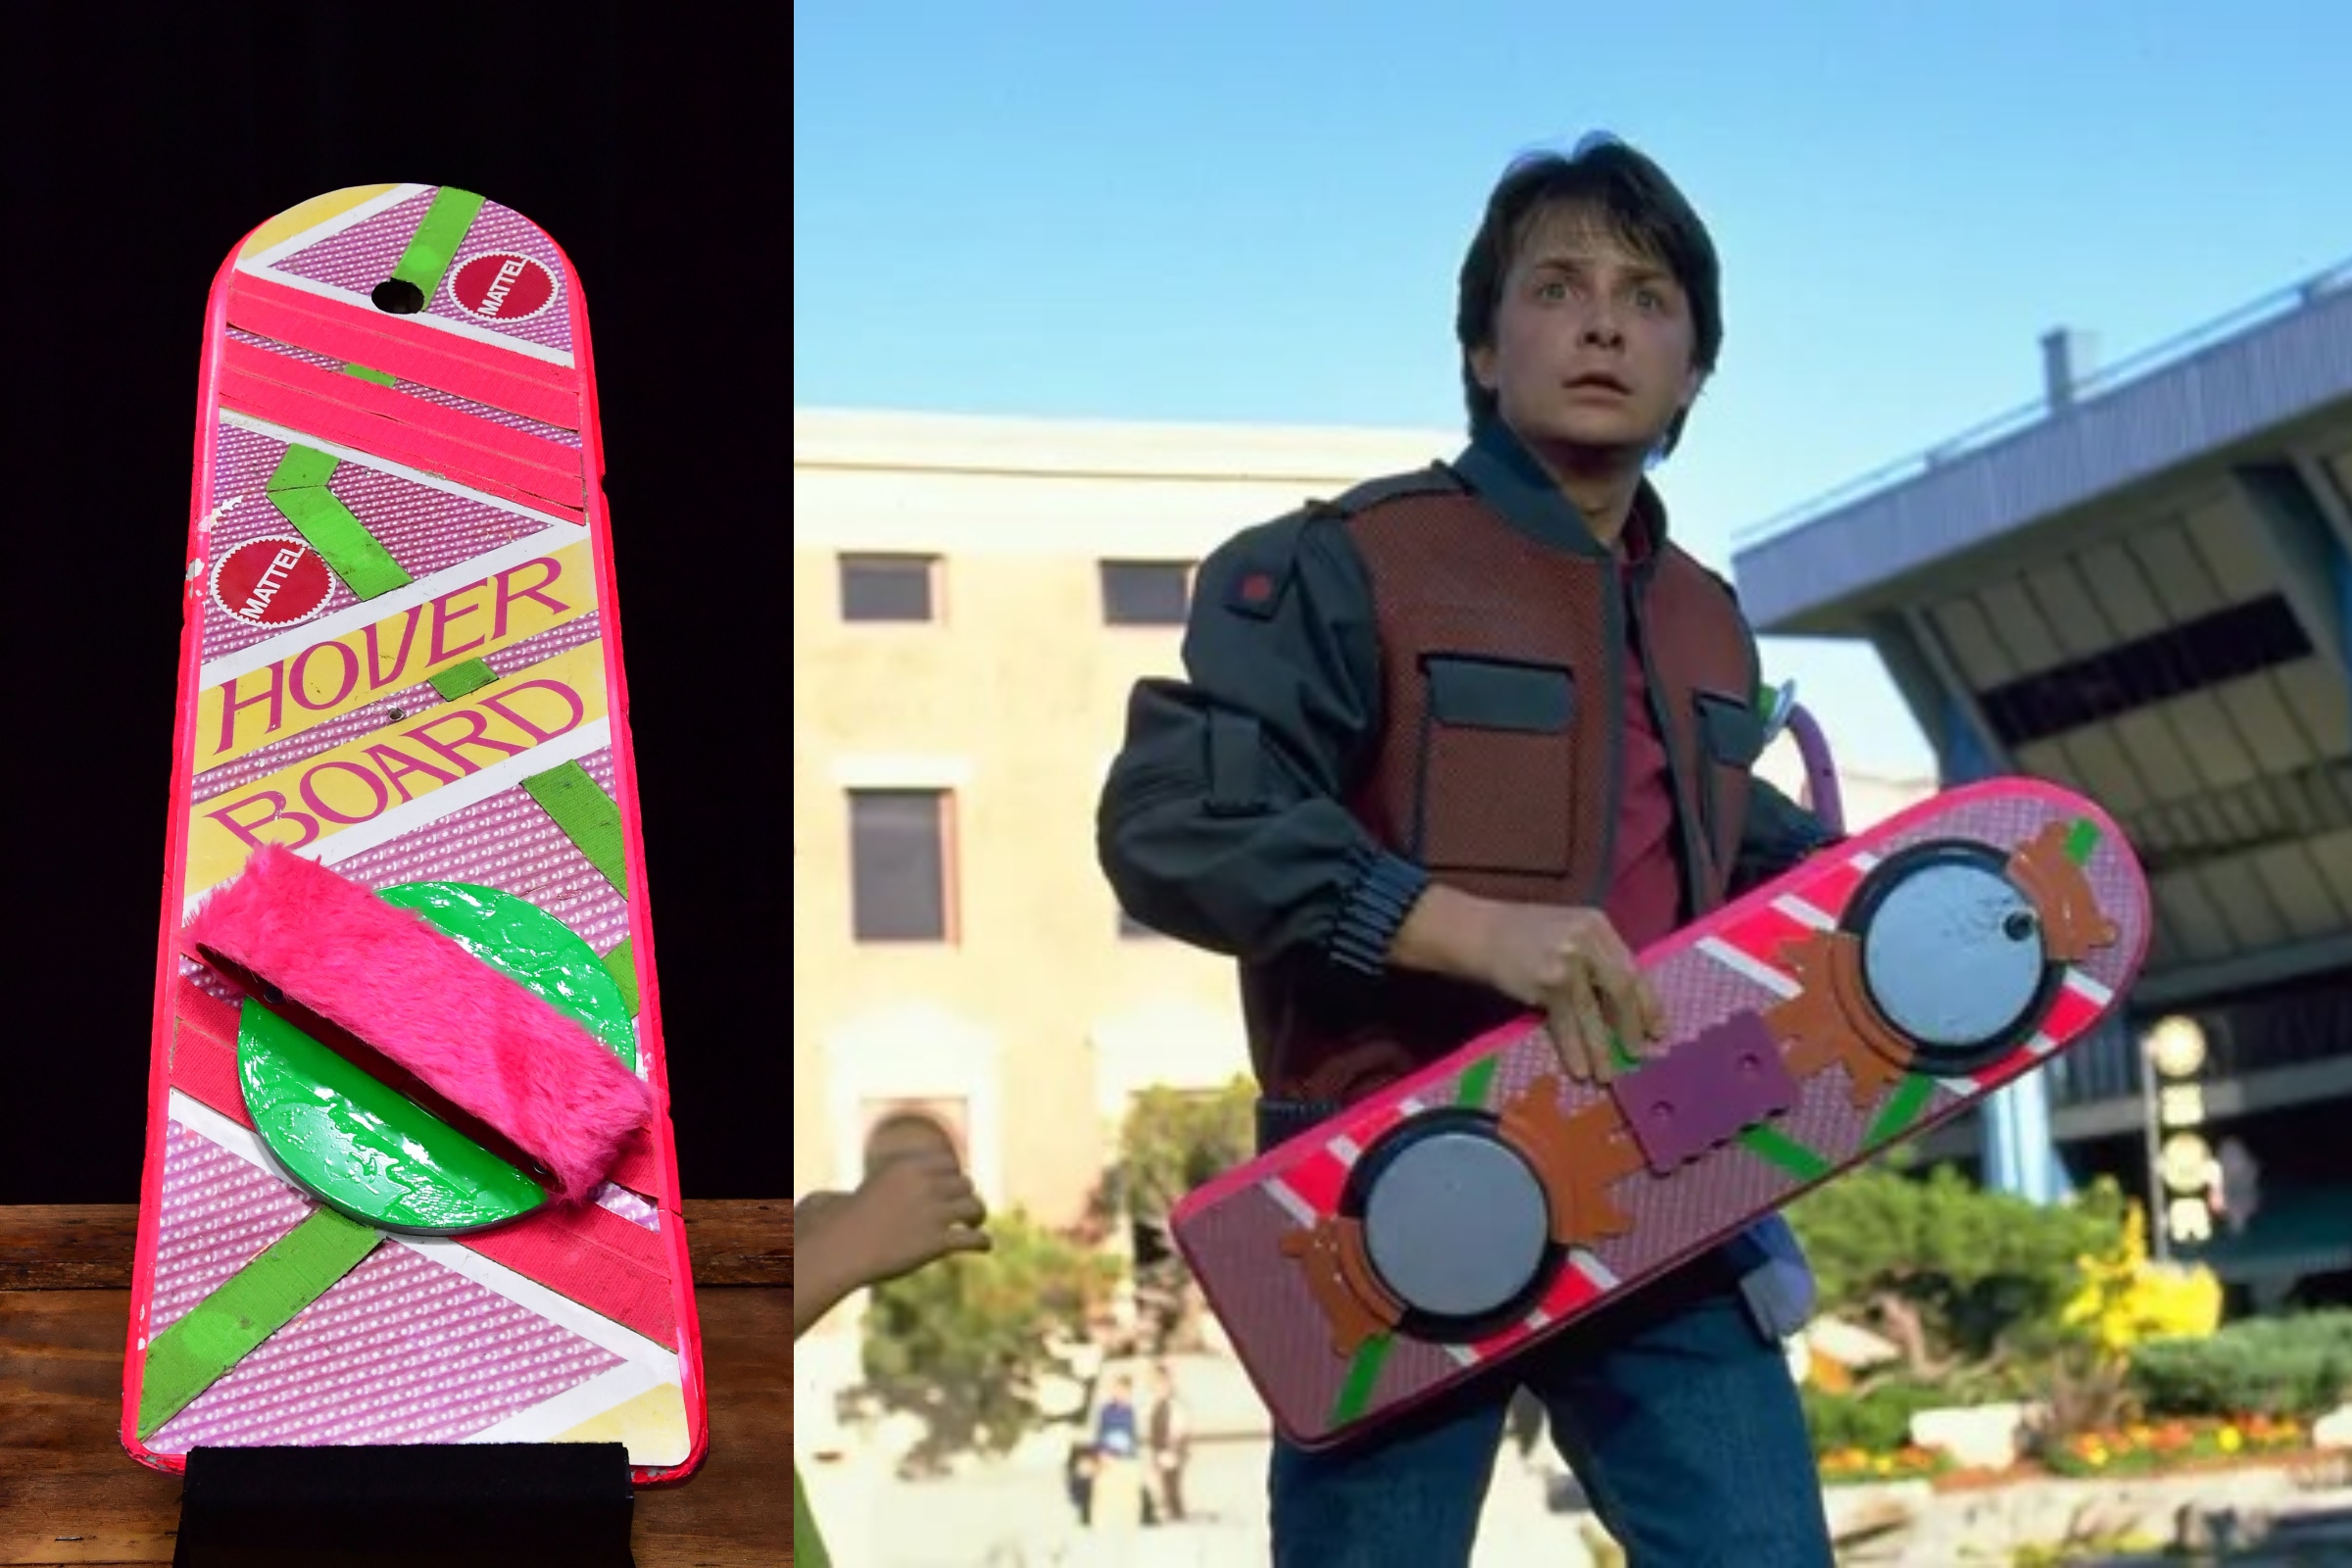 McFly's Original Hoverboard from 'Back to the Future' Is for Sale